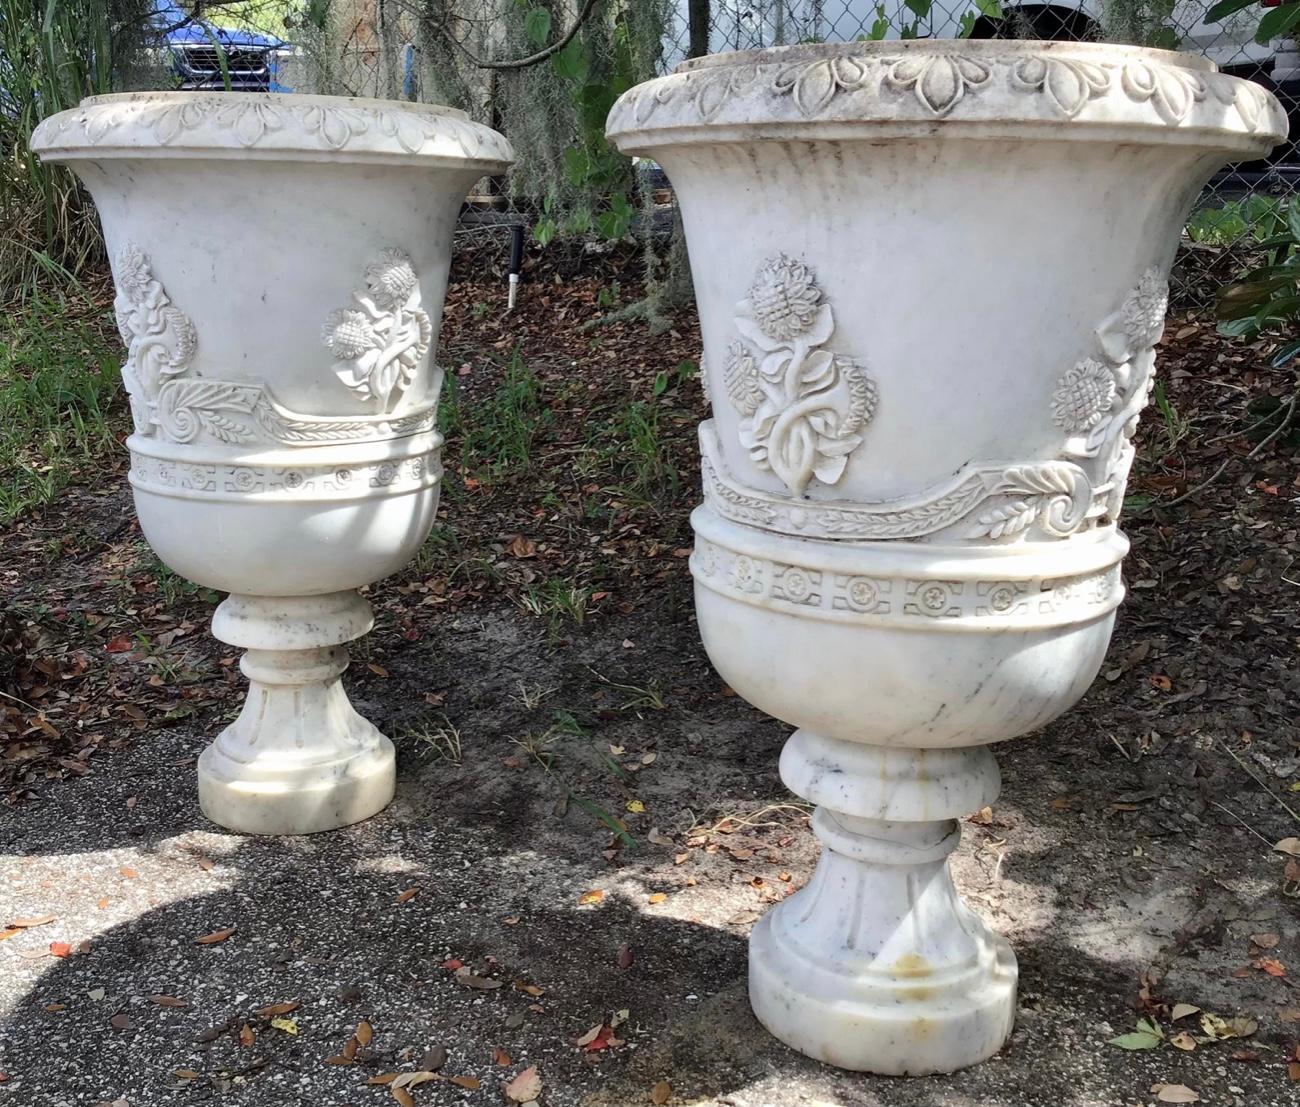 A very fine pair of hand-carved Carrera marble urns. Over sized and intricately designed with a carved rim and the body with large sunflowers and other intricate details. Approximately 250 Lbs each.